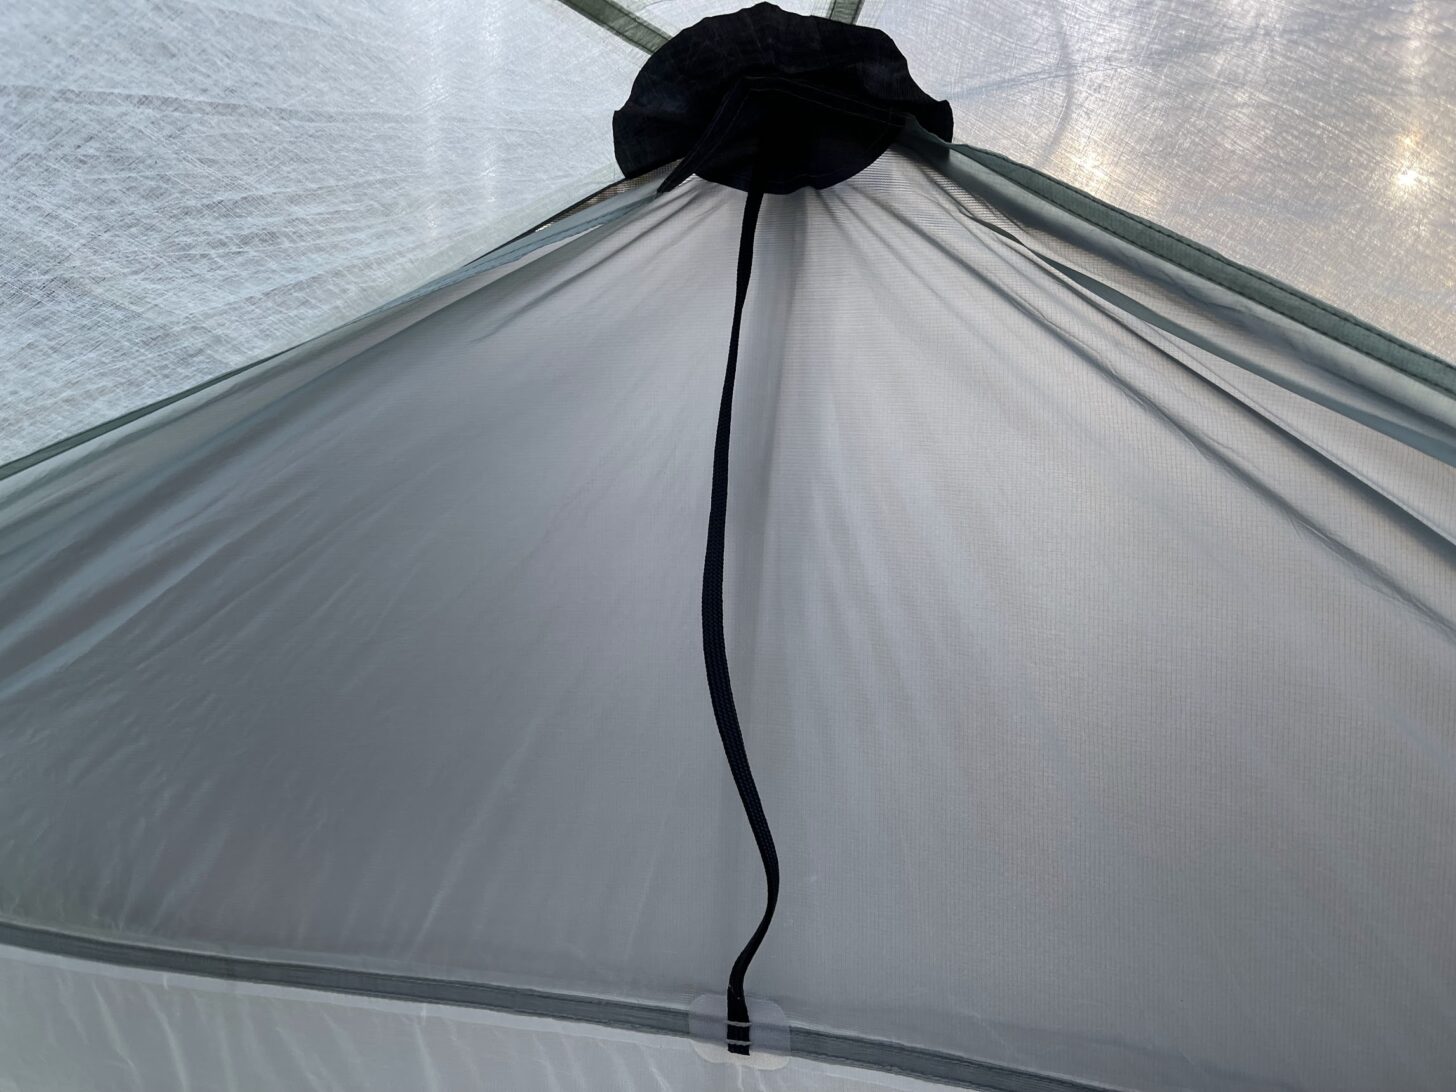 A close-up of a rain protection panel on the inside of the tent.